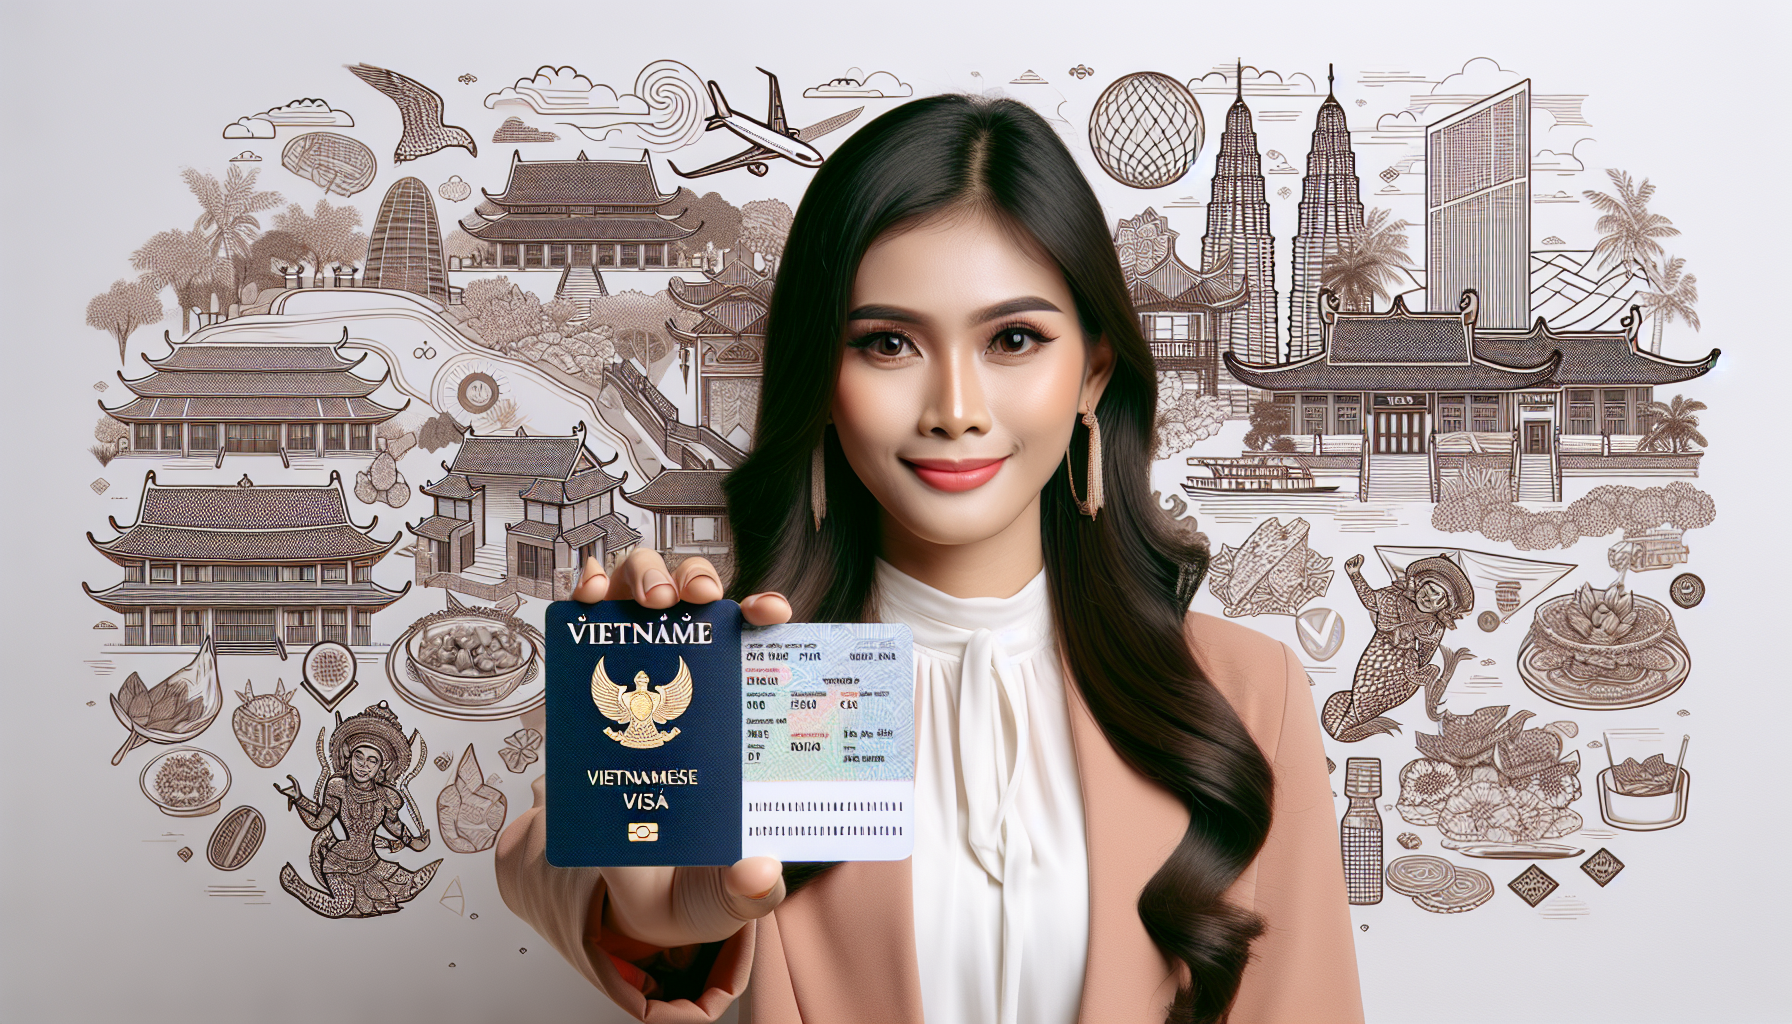 Do Indonesian Citizens Require Vietnamese Sponsorship for Business Visas? How to Apply?